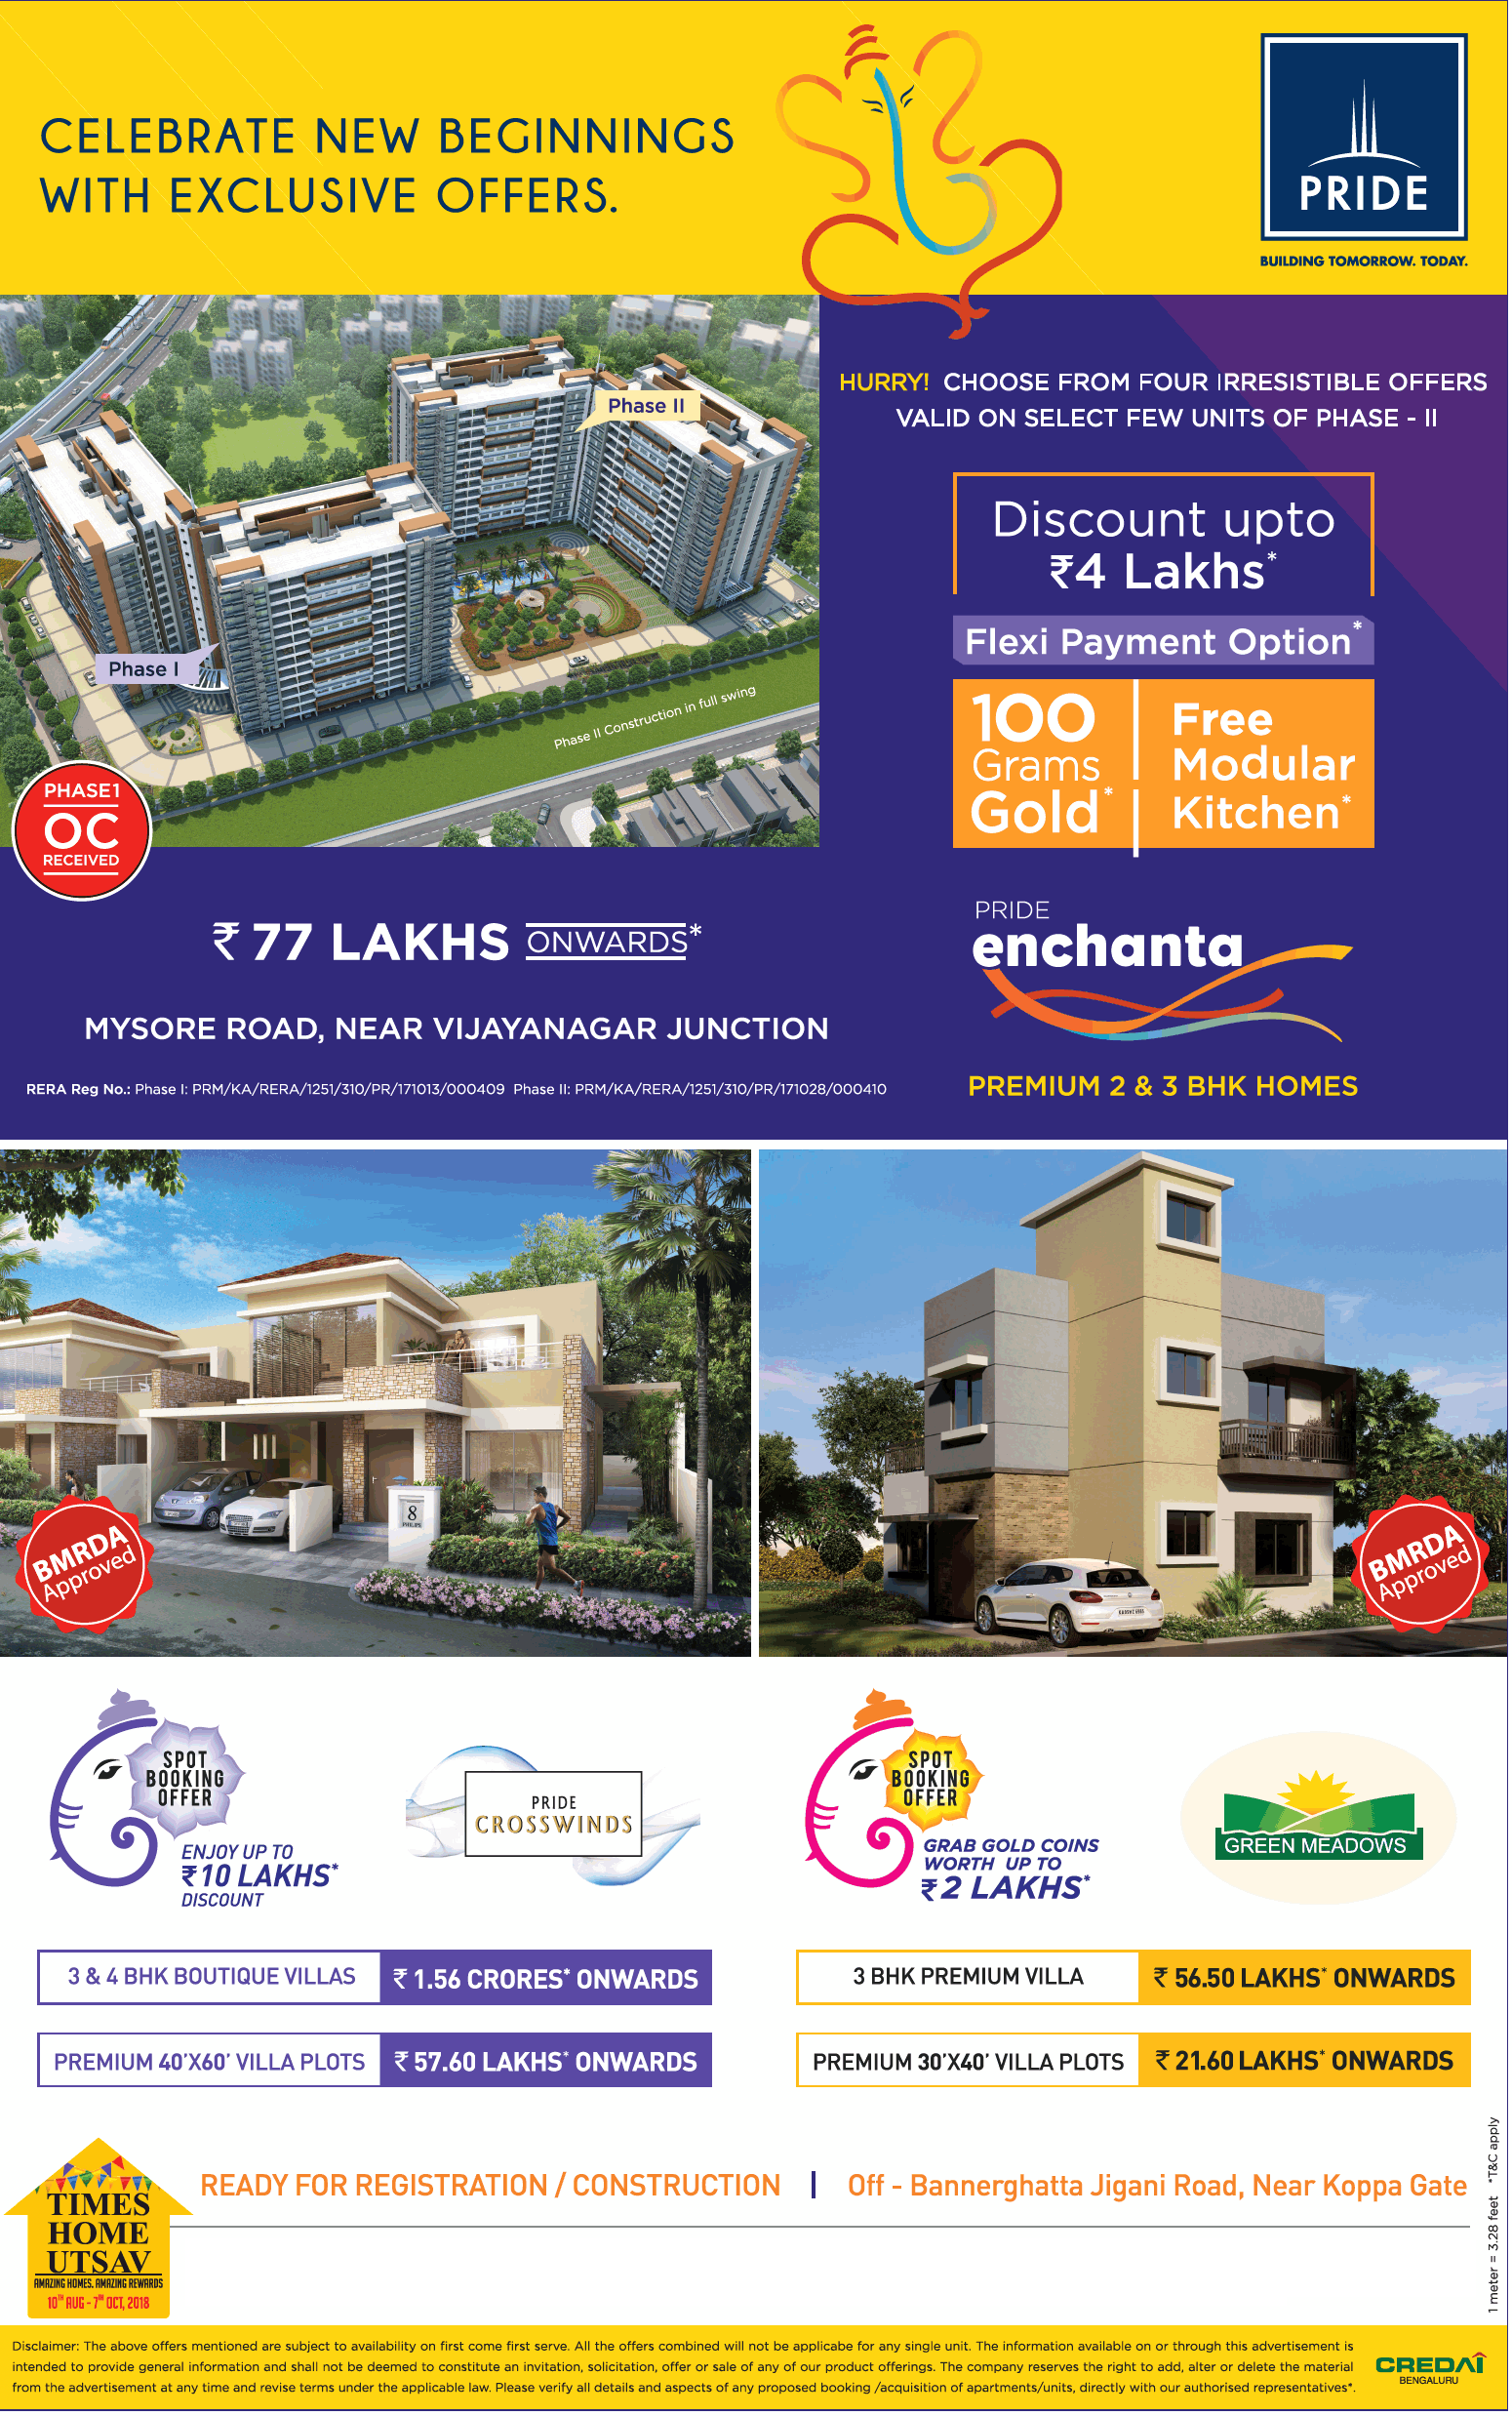 Avail flexi payment option at Pride Projects in Bangalore Update